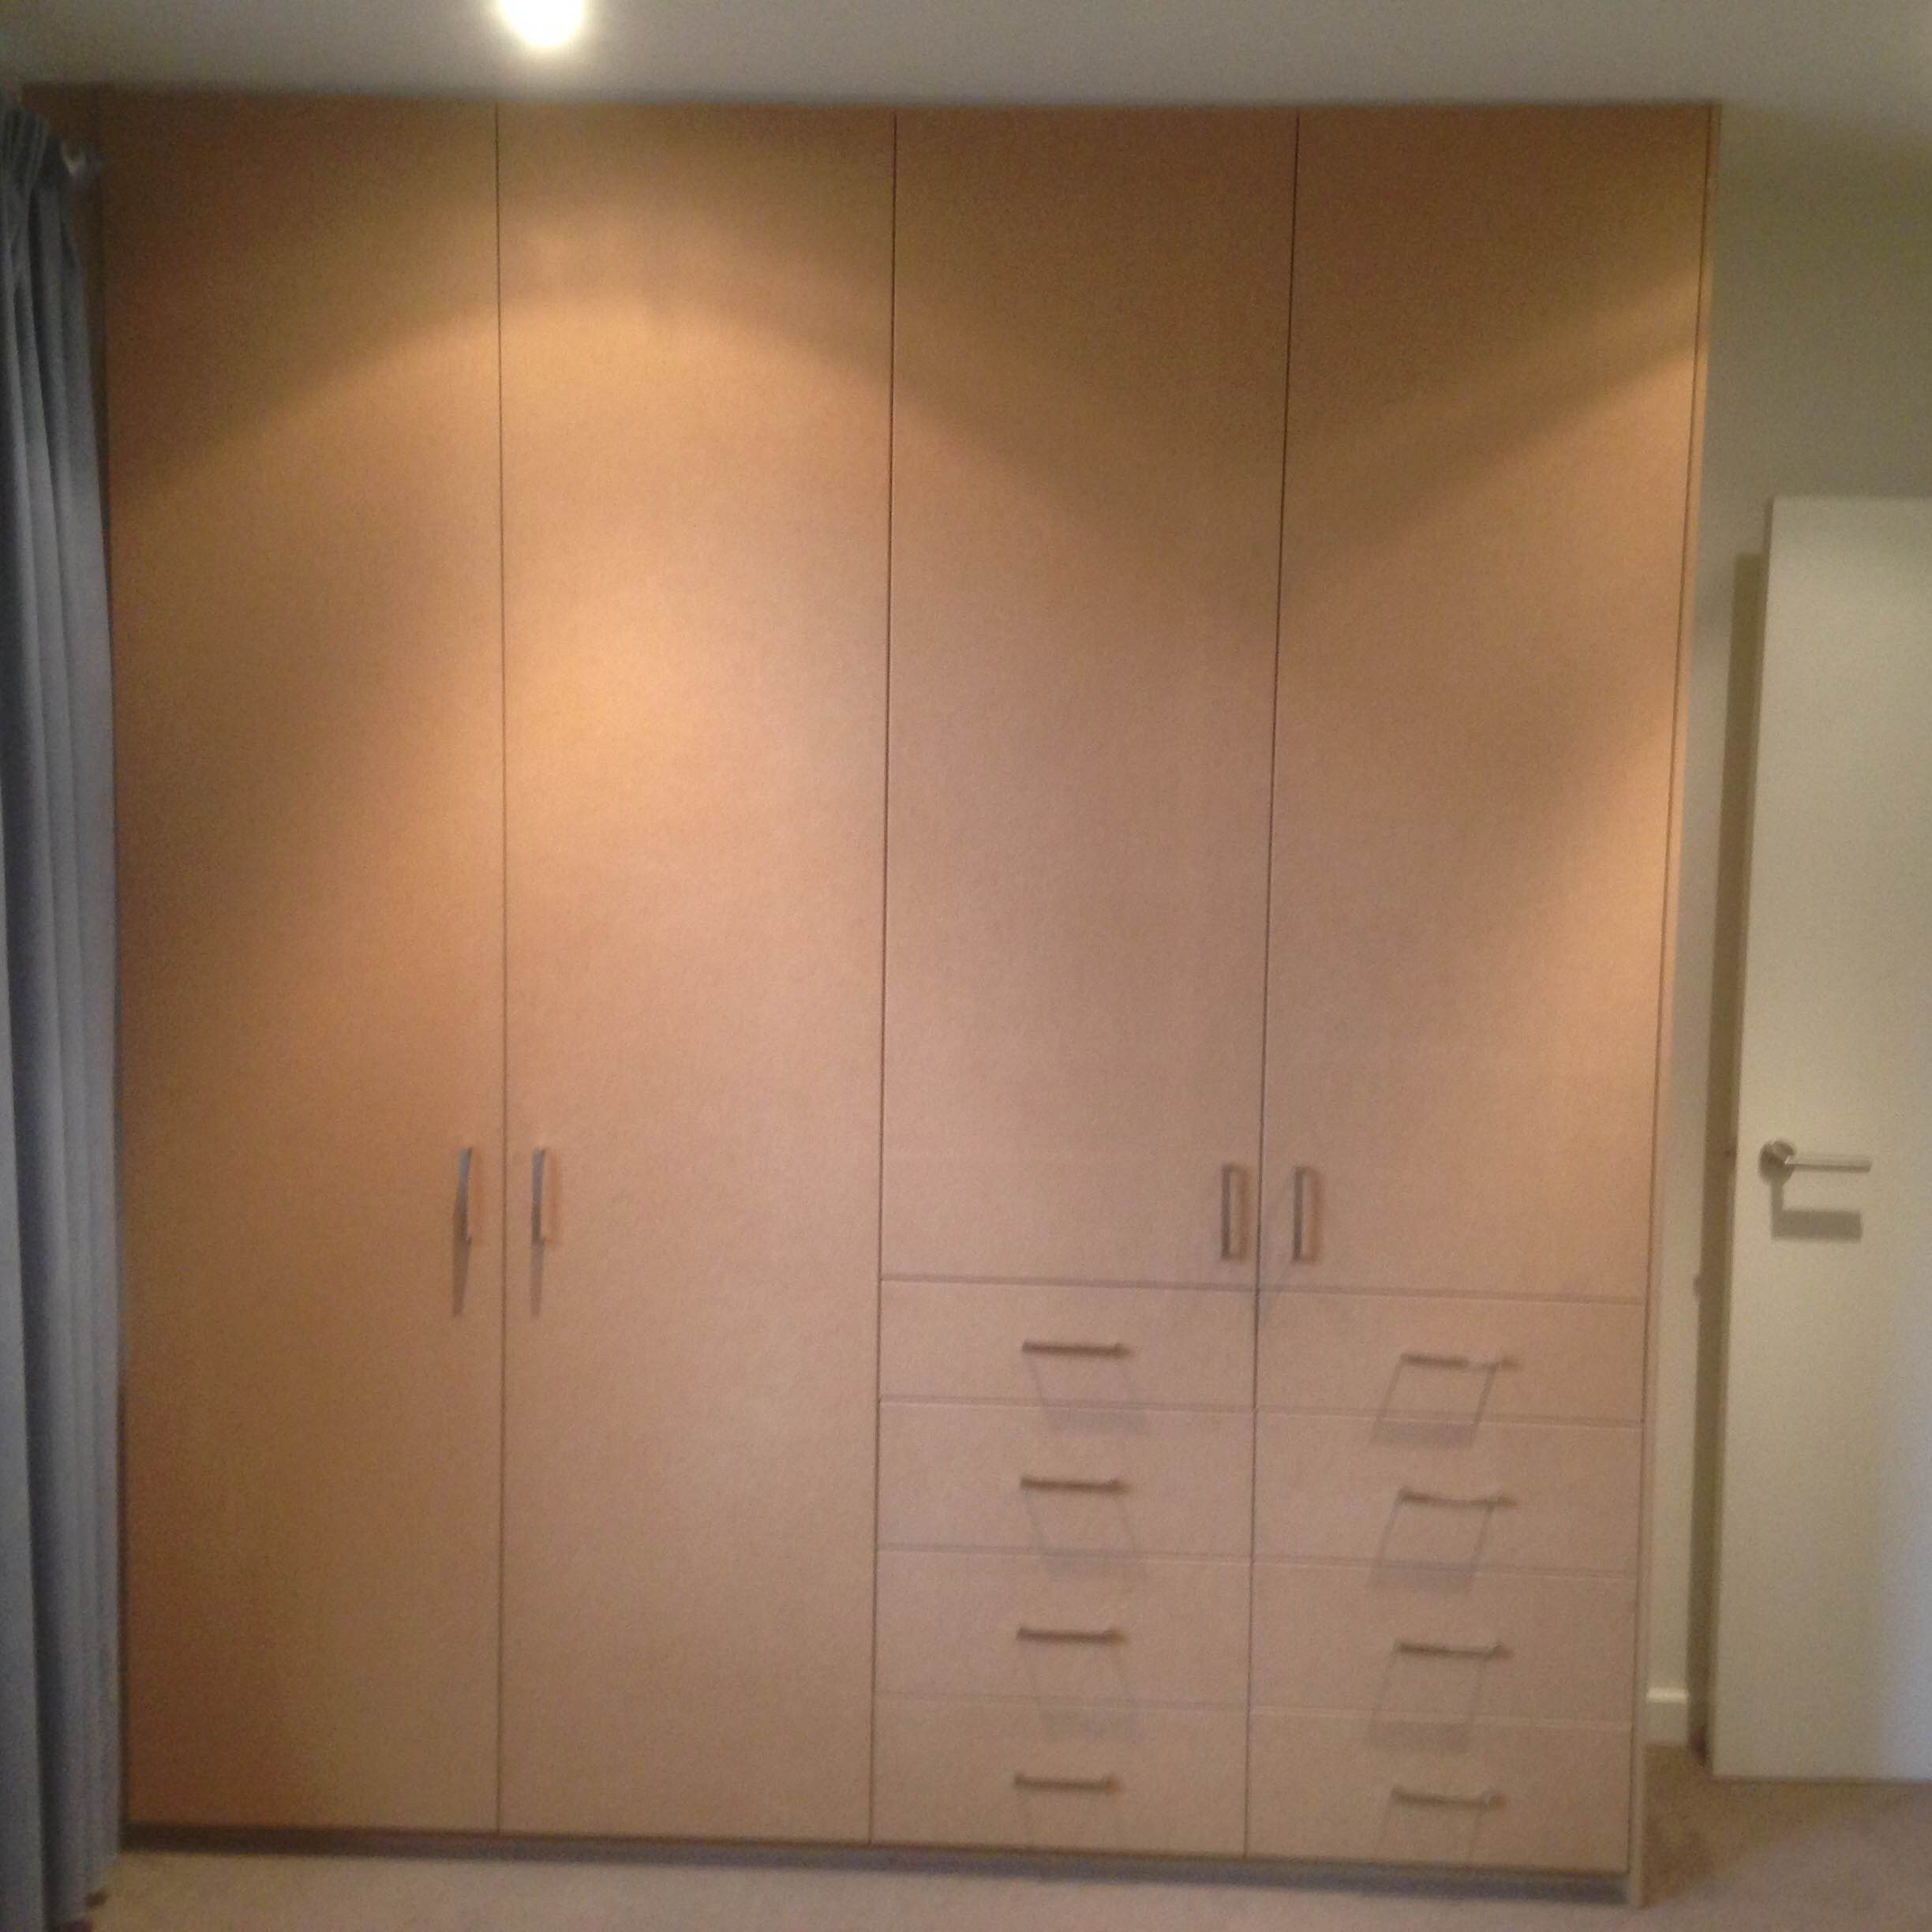 Raw plain MDF doors with exposed drawer fronts